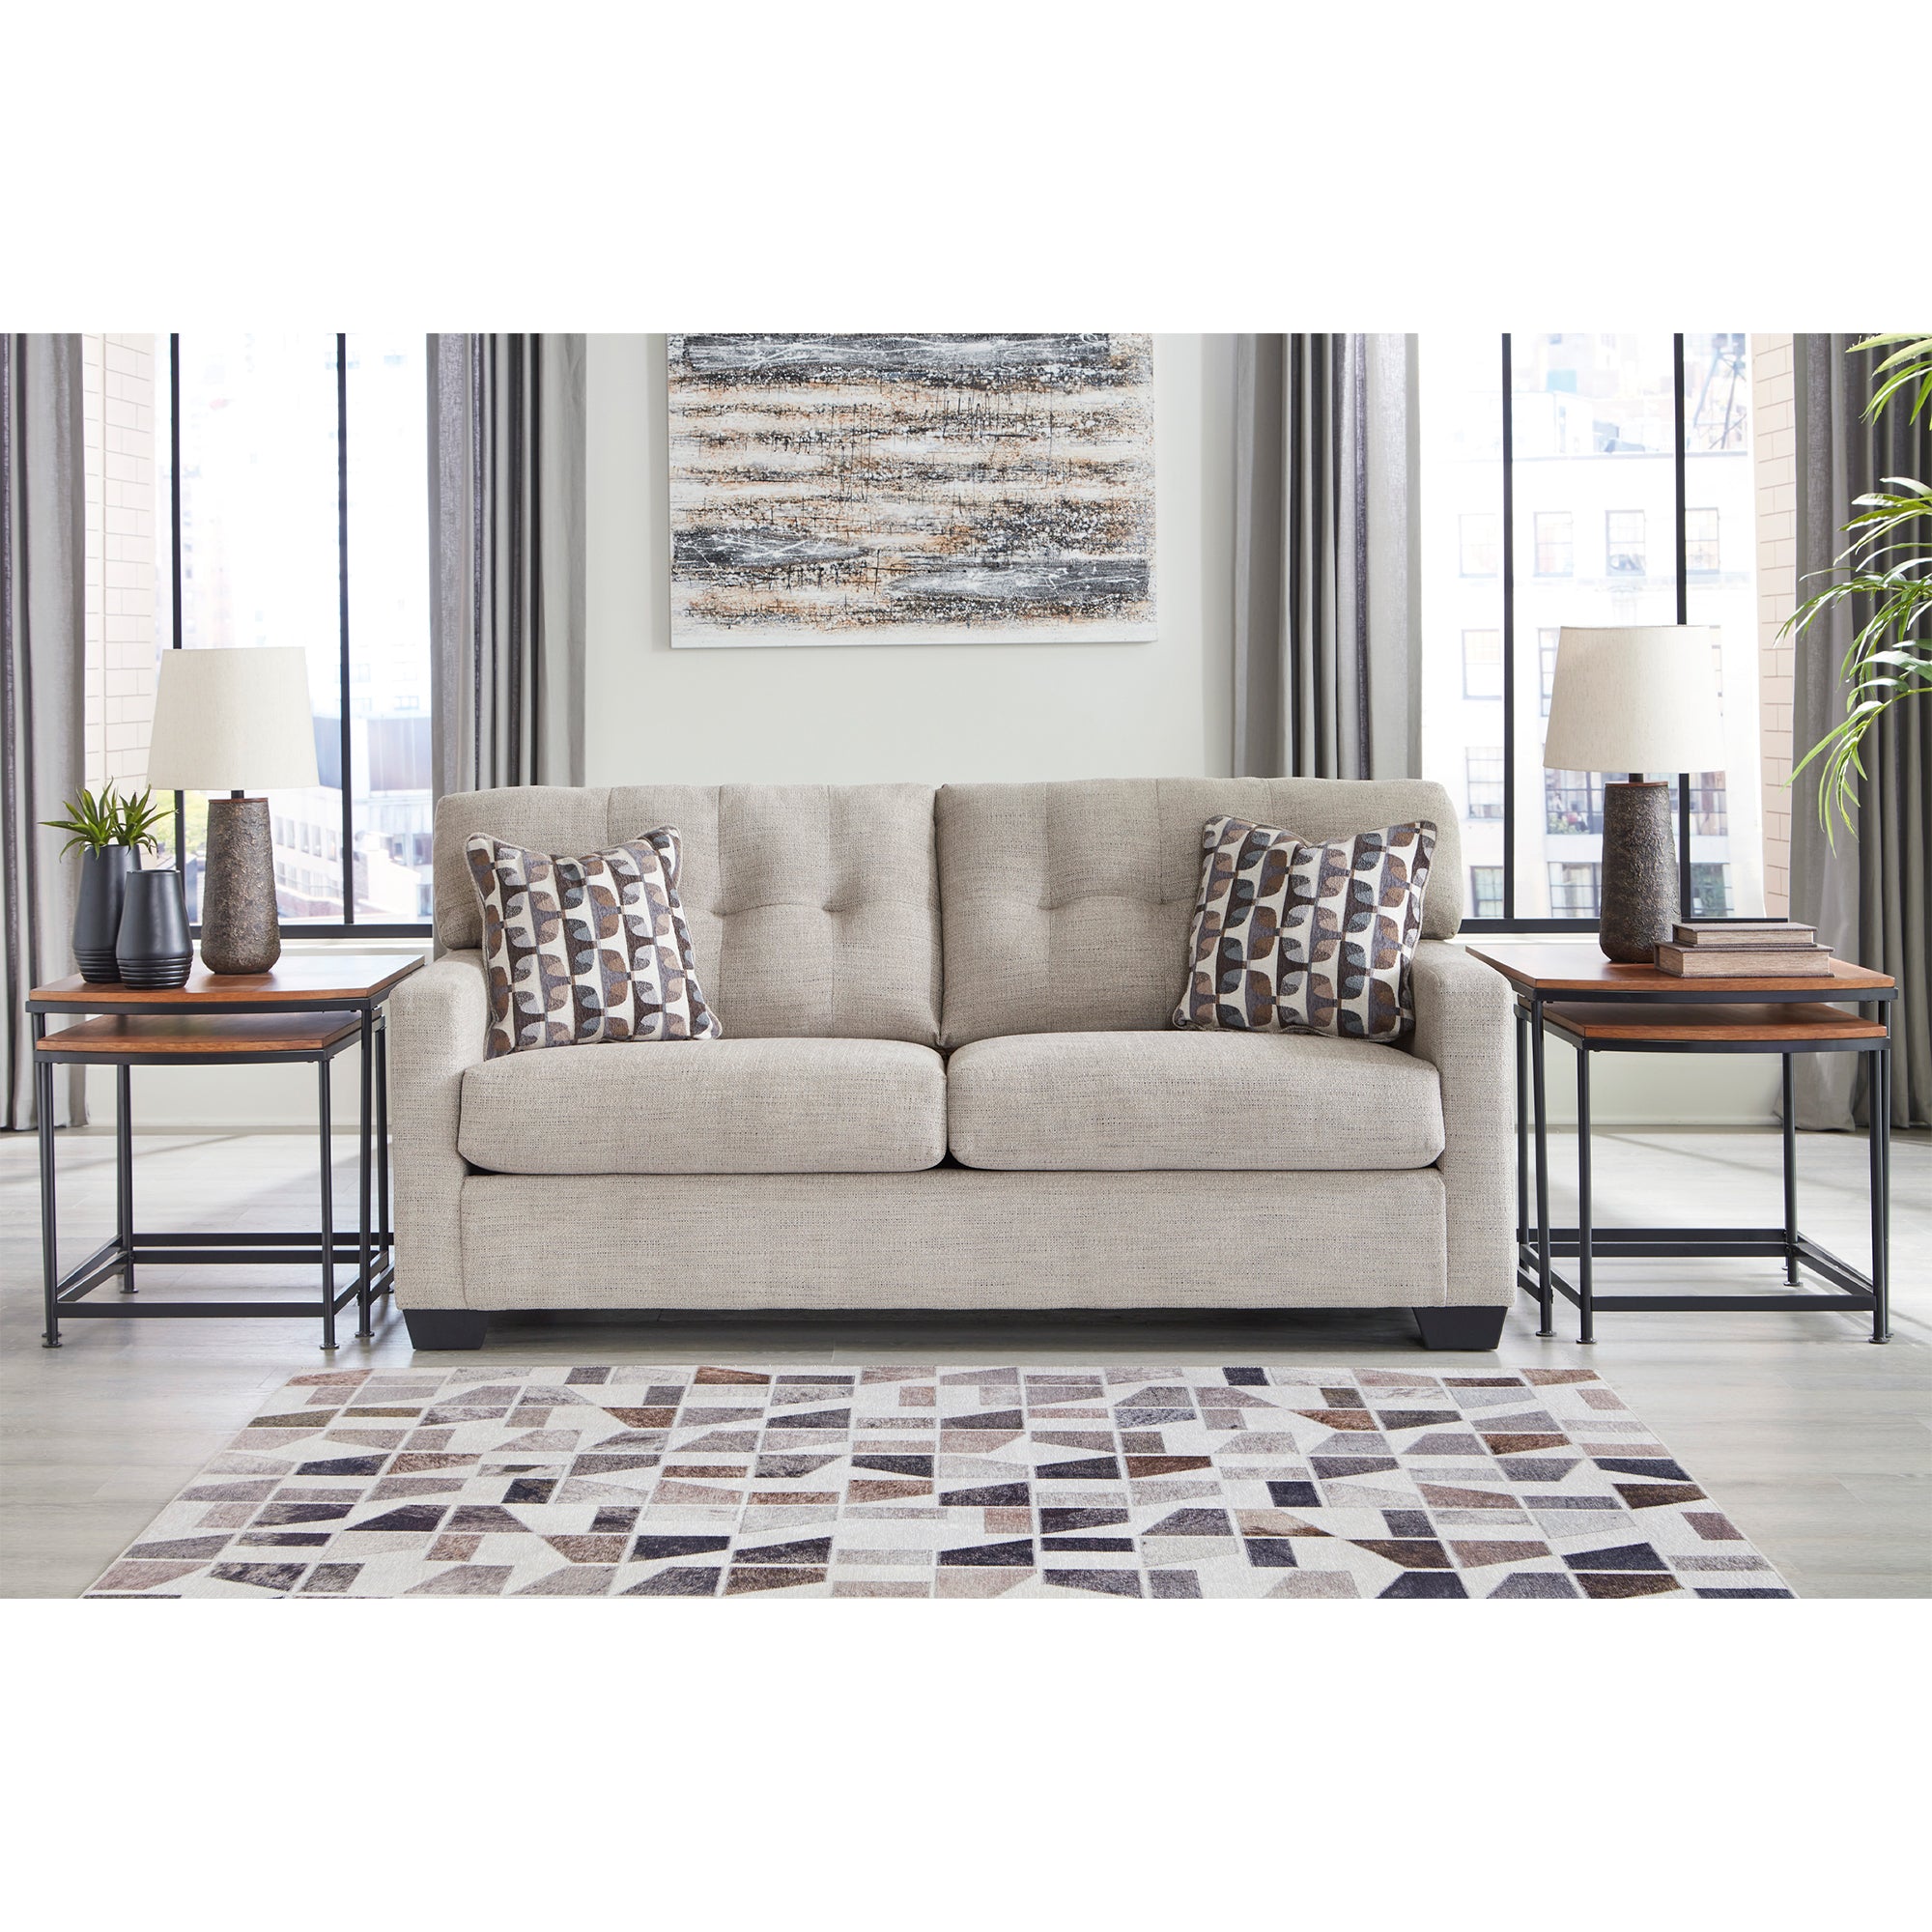 Stylish Mahoney Sofa in pebble gray, featuring deep, comfortable seating - perfect for Milwaukee living spaces